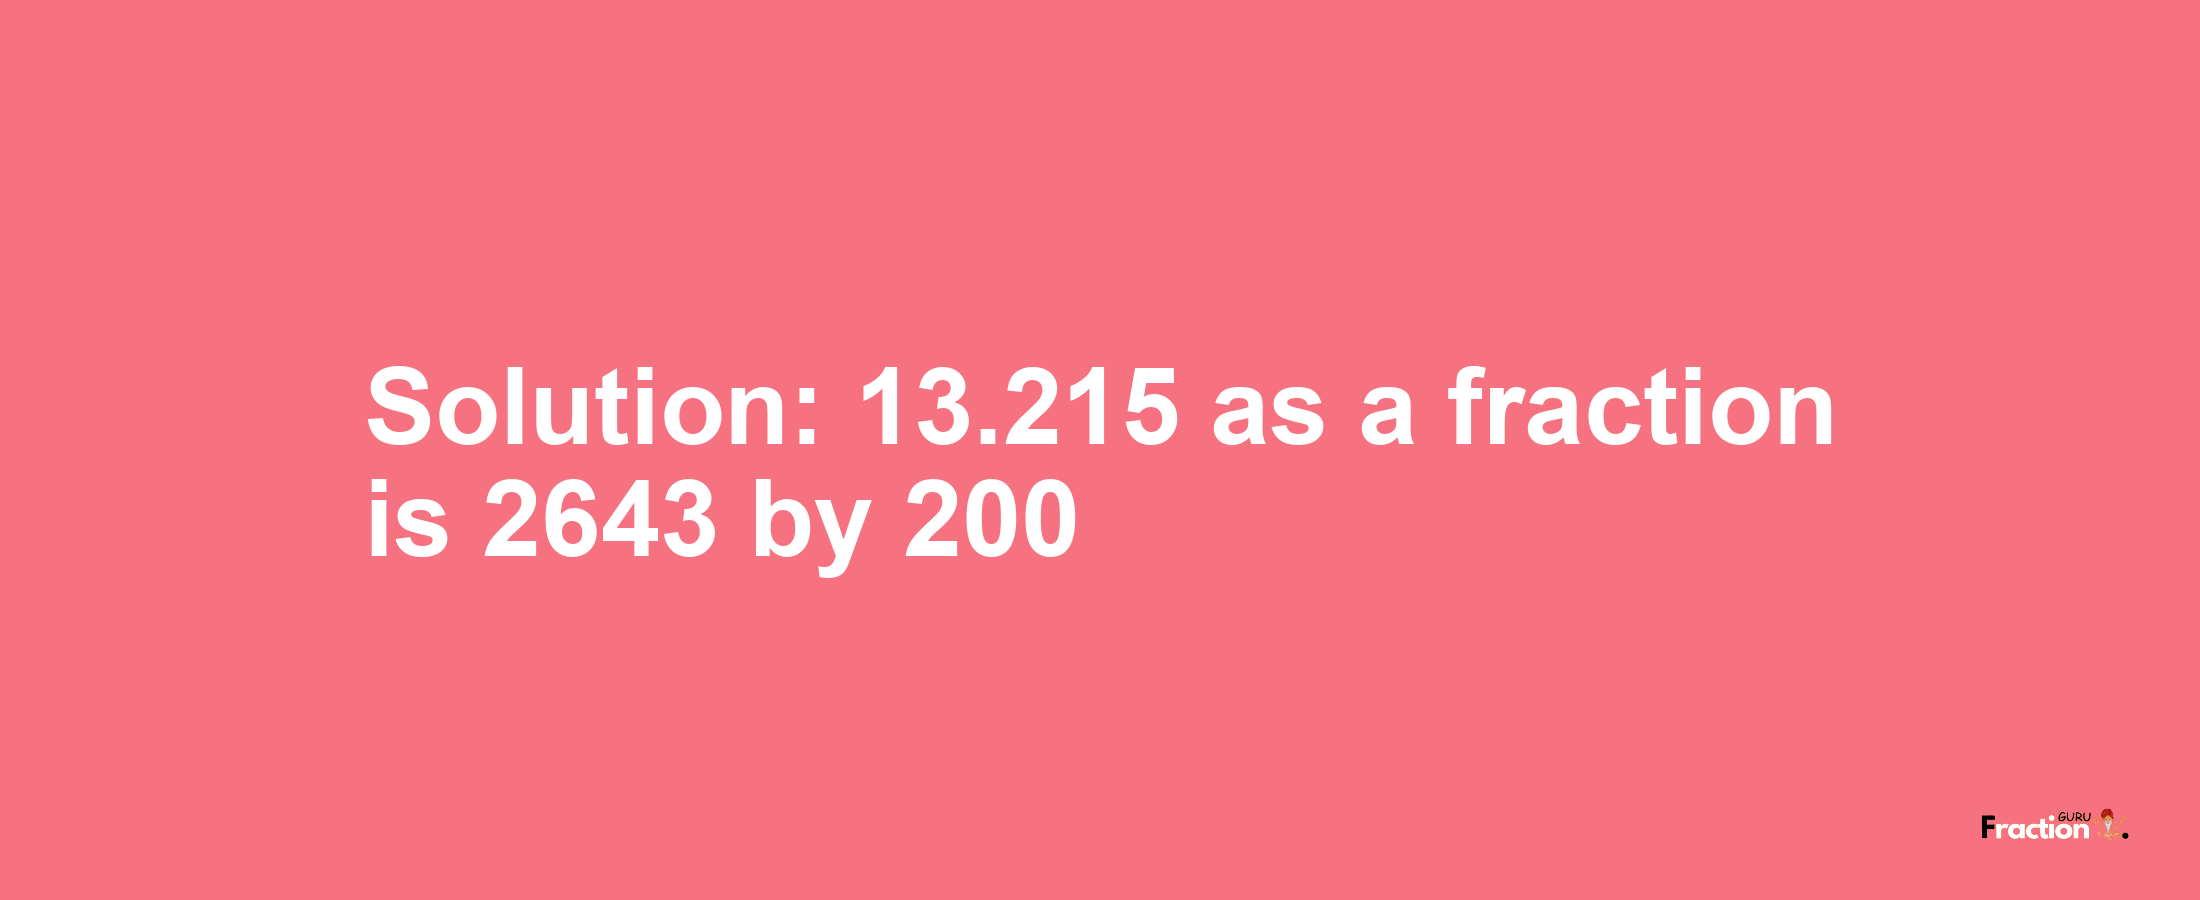 Solution:13.215 as a fraction is 2643/200